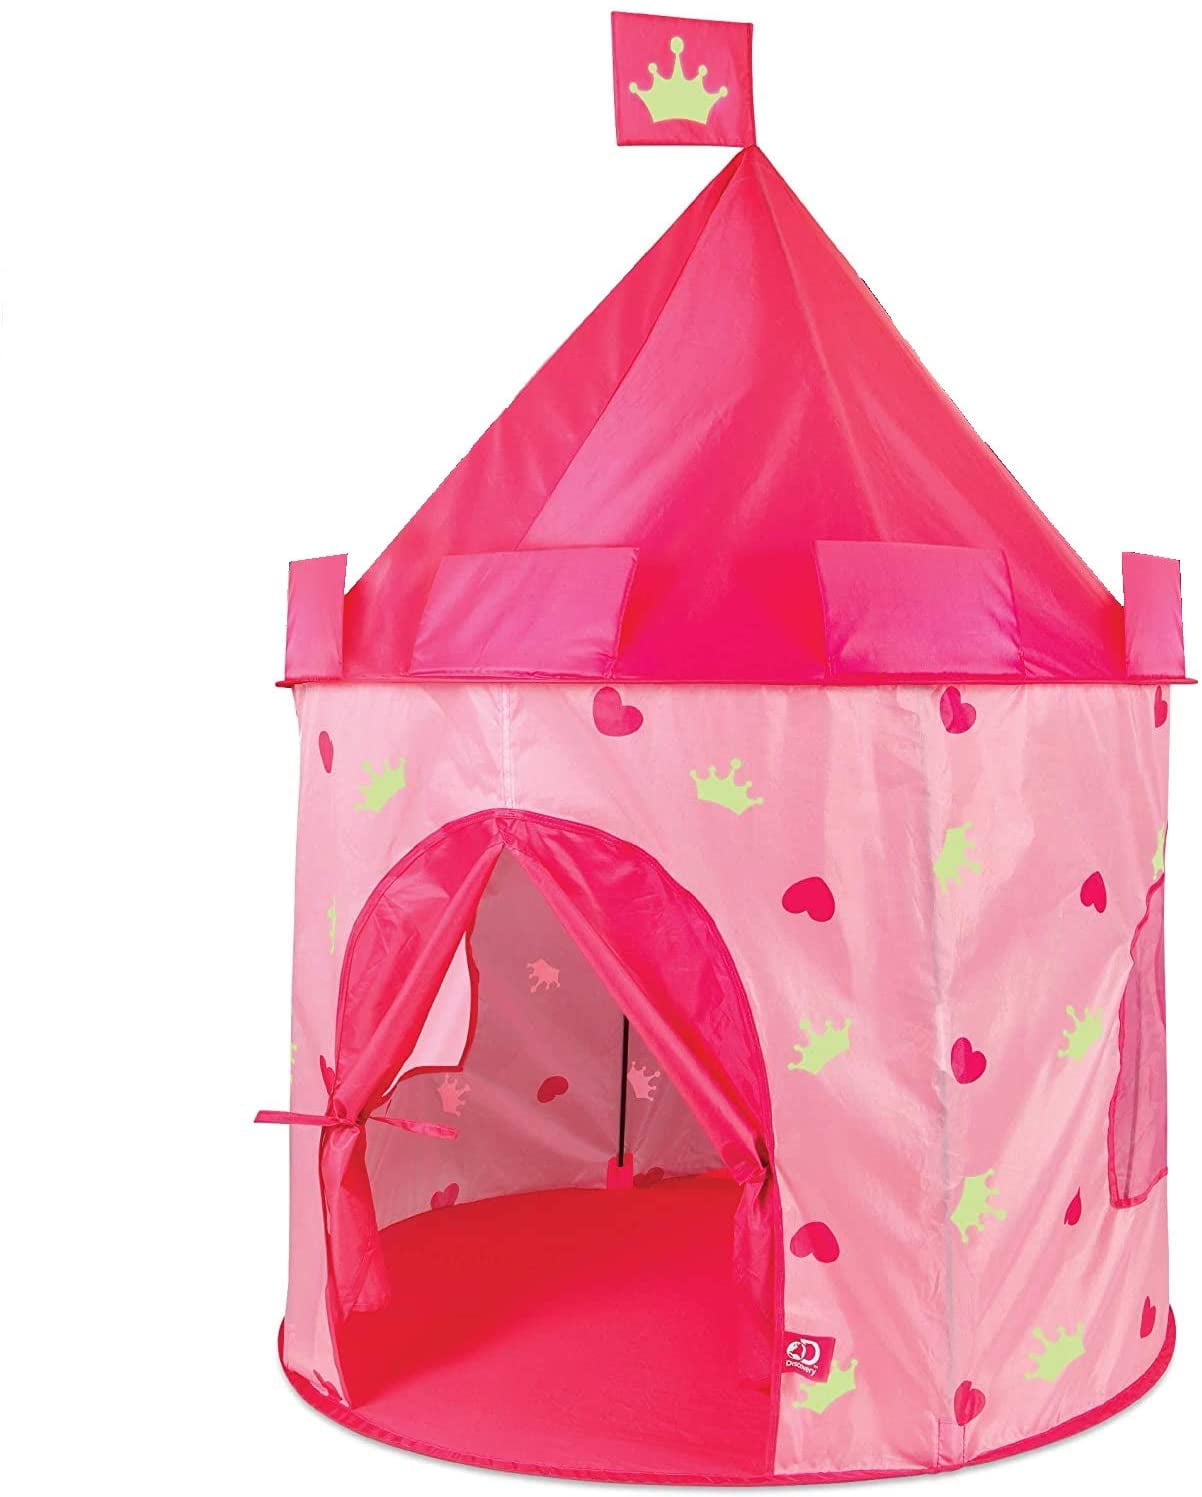 Kids Play Tent In out door Camping GLOW IN DARK Girls Gift Toys Princess TOY